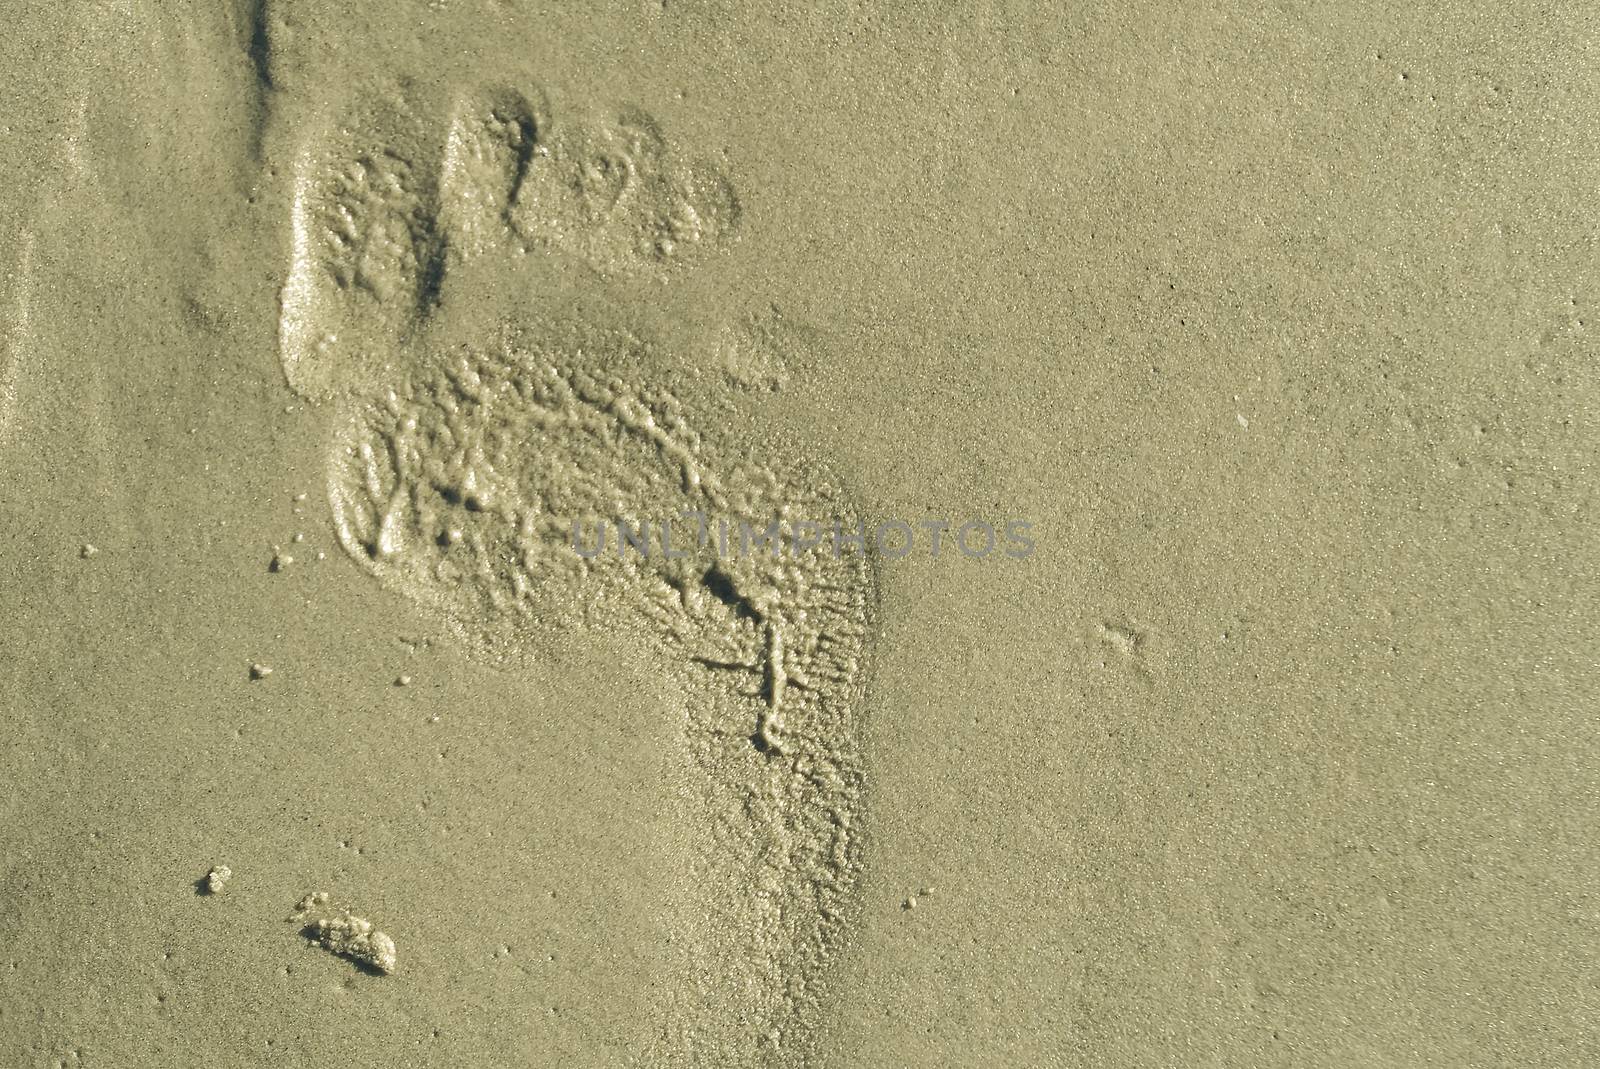 footsteps on beach in sandy. Footsteps on the coral sandy beach. footprints in the sand